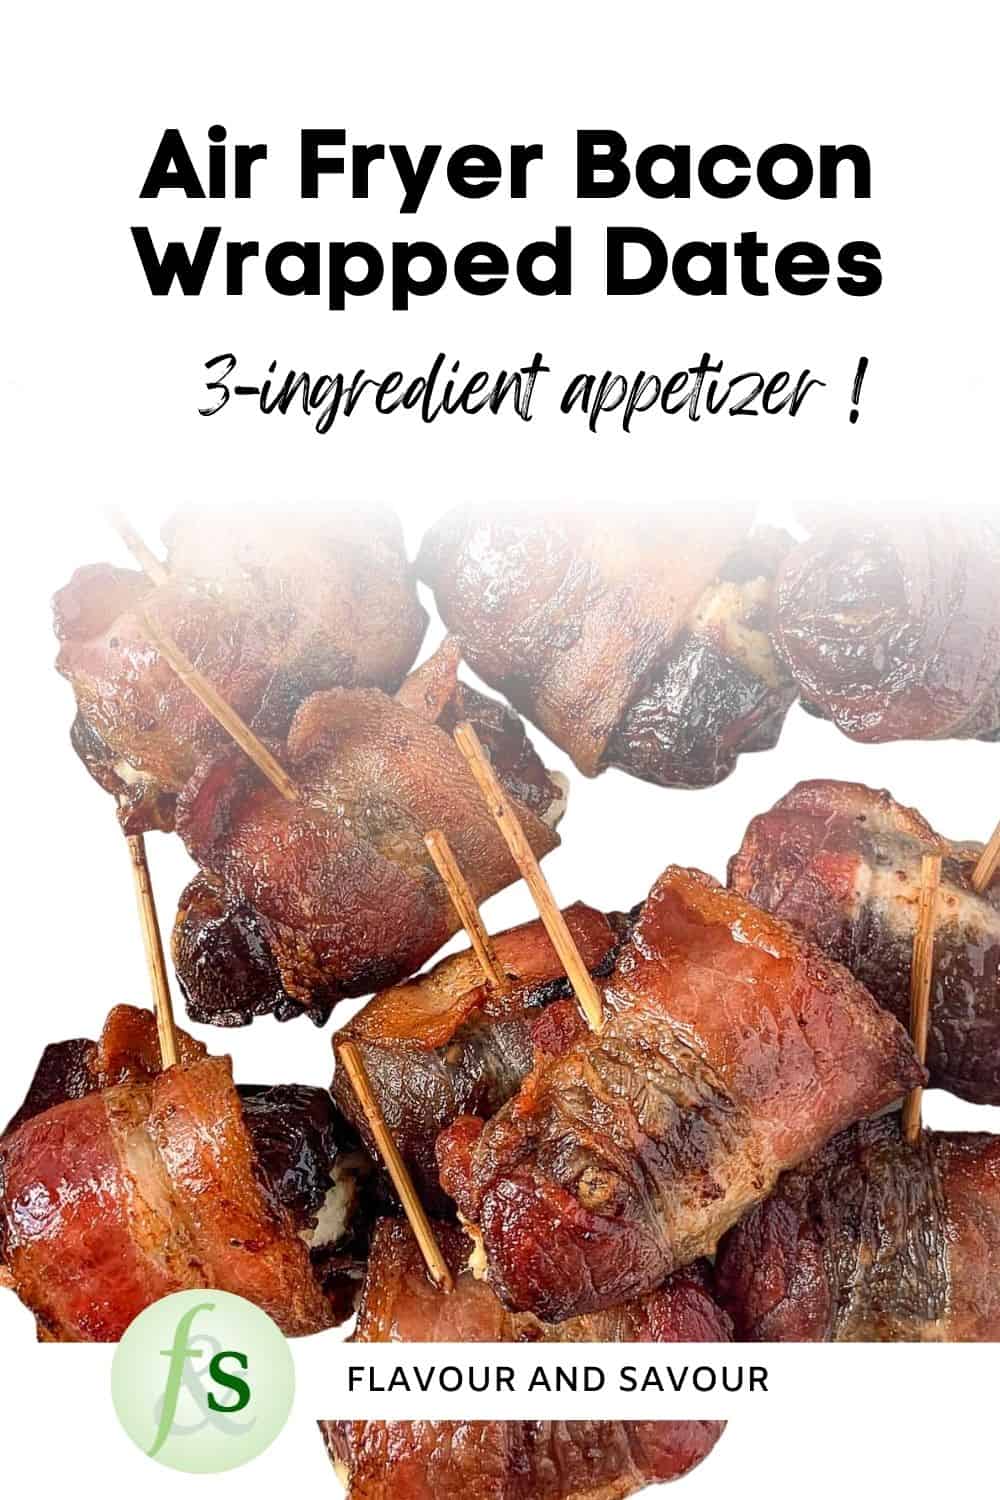 Image with text overlay for bacon-wrapped stuffed dates cooked in an air fryer.